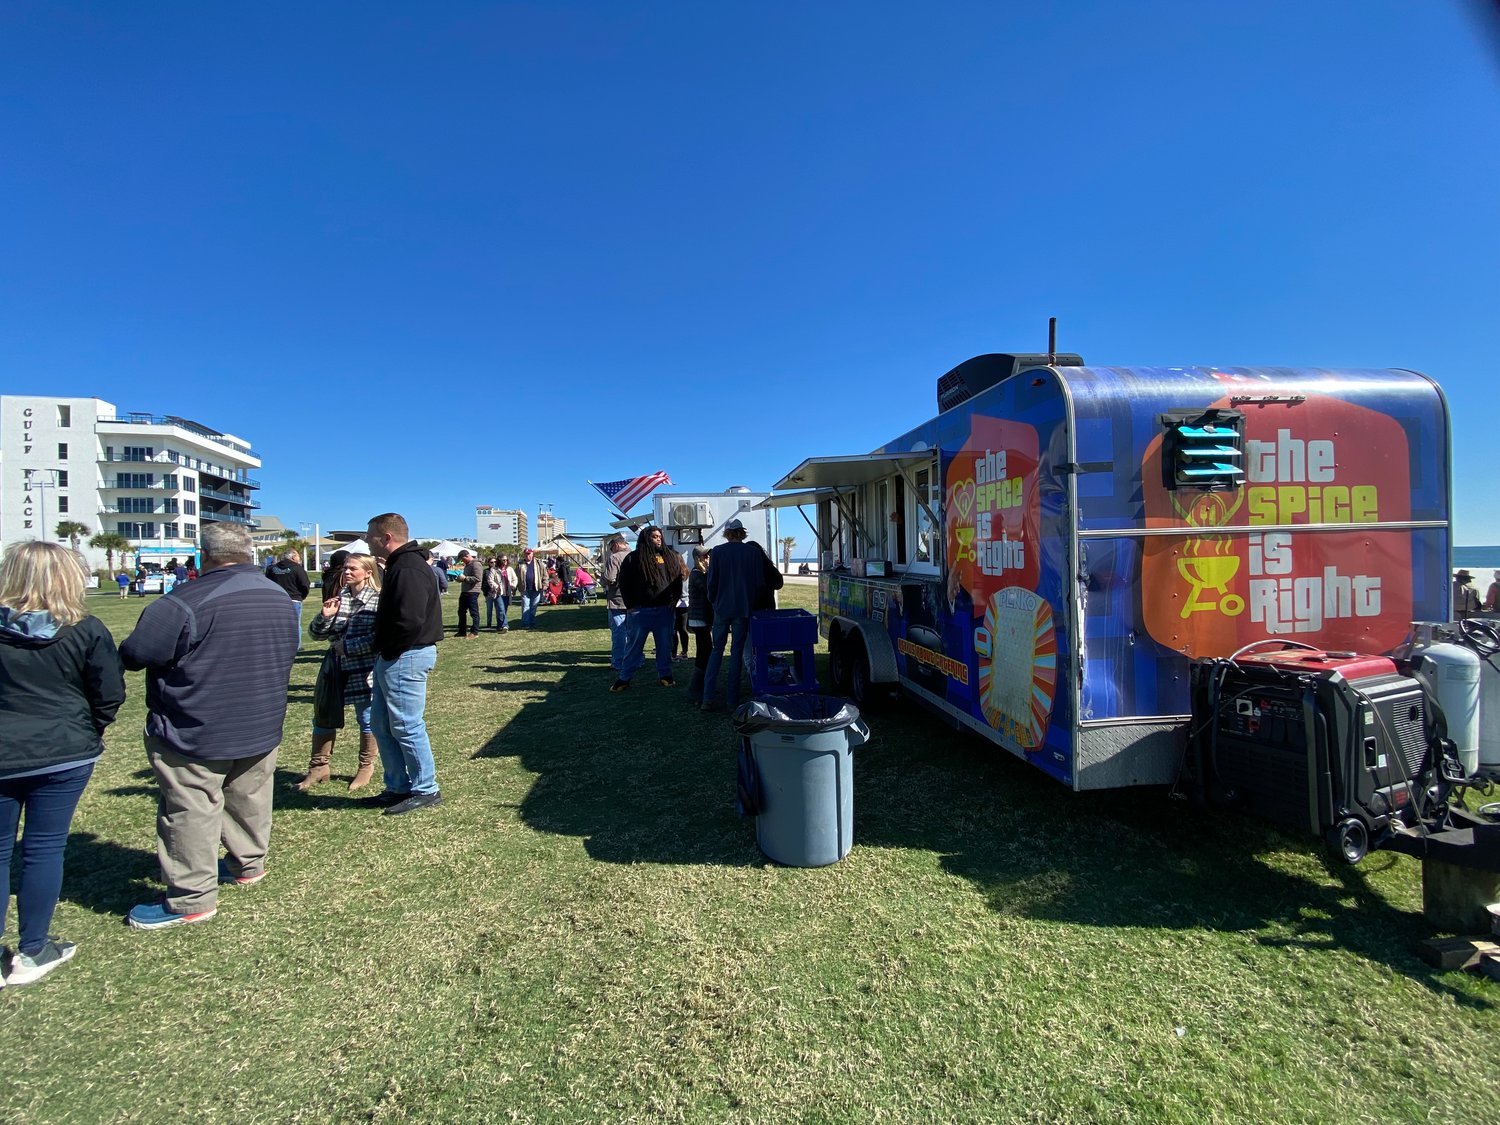 The Spice is Right food truck was one of over 10 food trucks that participated in the first Coastal Alabama Food Truck Festival.